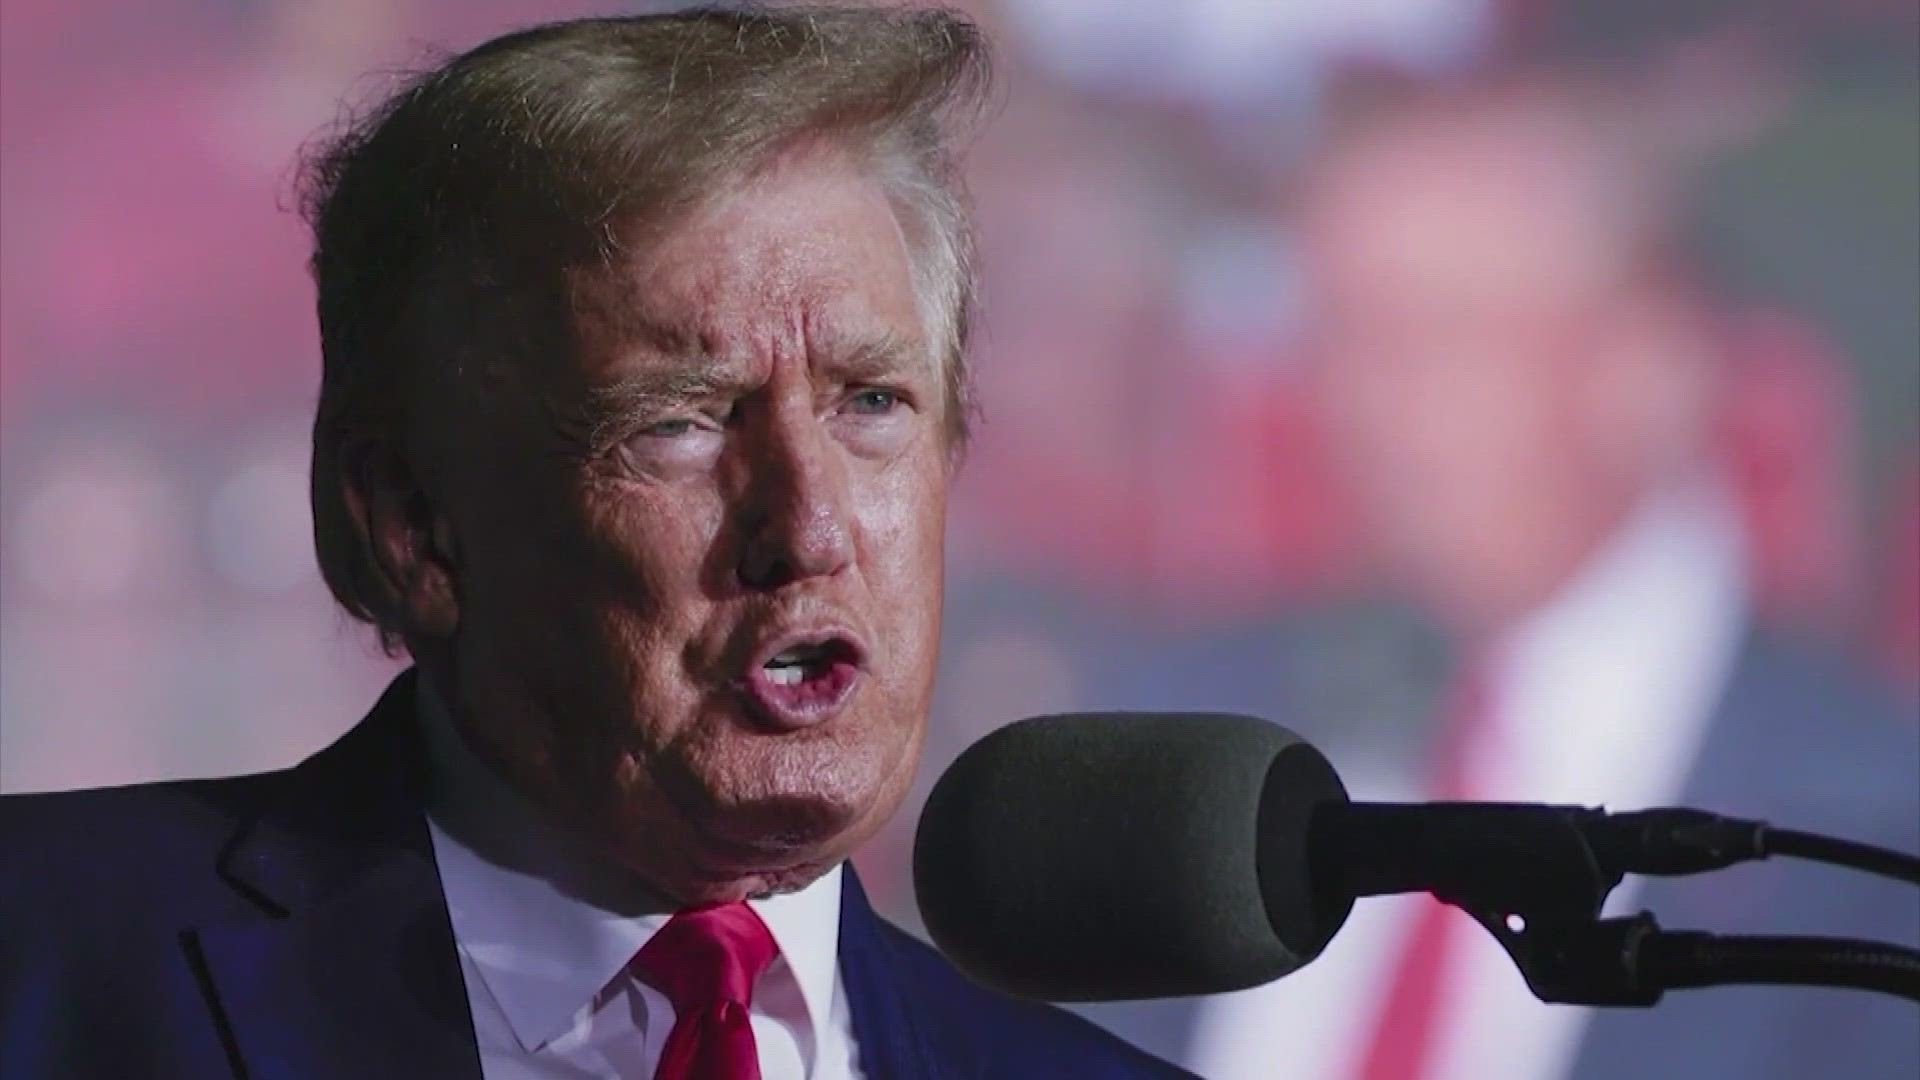 The event comes amid a flurry of legal battles surrounding Trump's alleged efforts to overturn the 2020 election and alleged fraudulent business dealings.